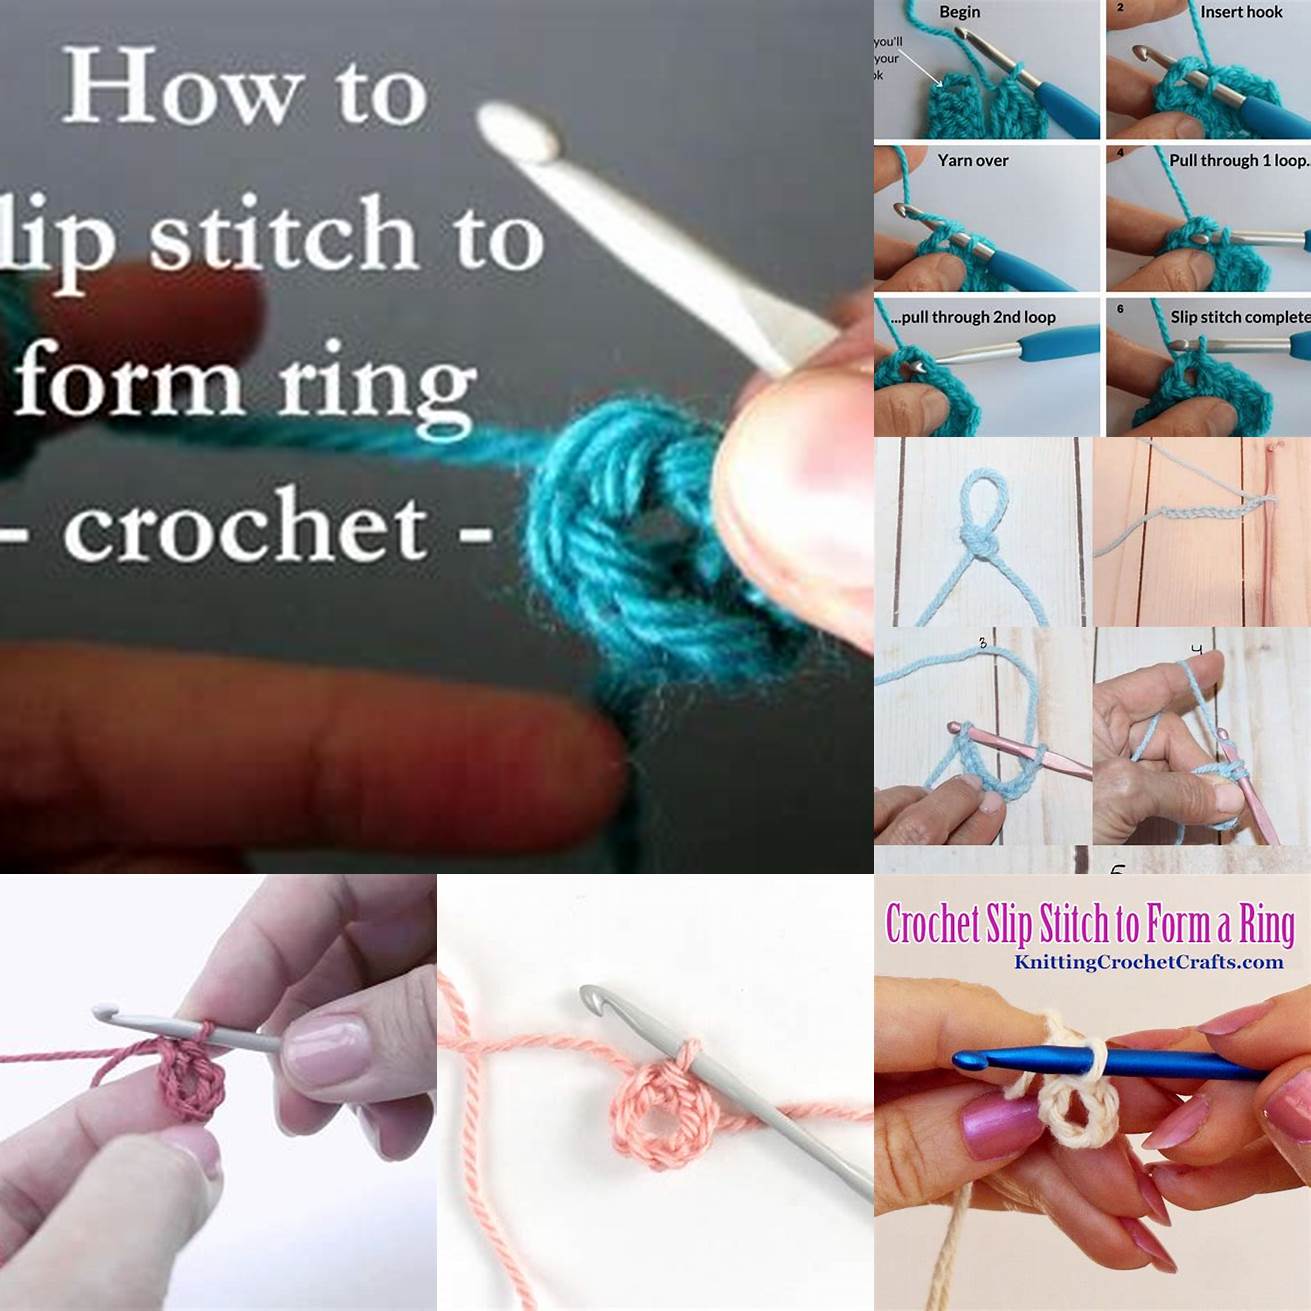 Join the first and last single crochets with a slip stitch to close the ring